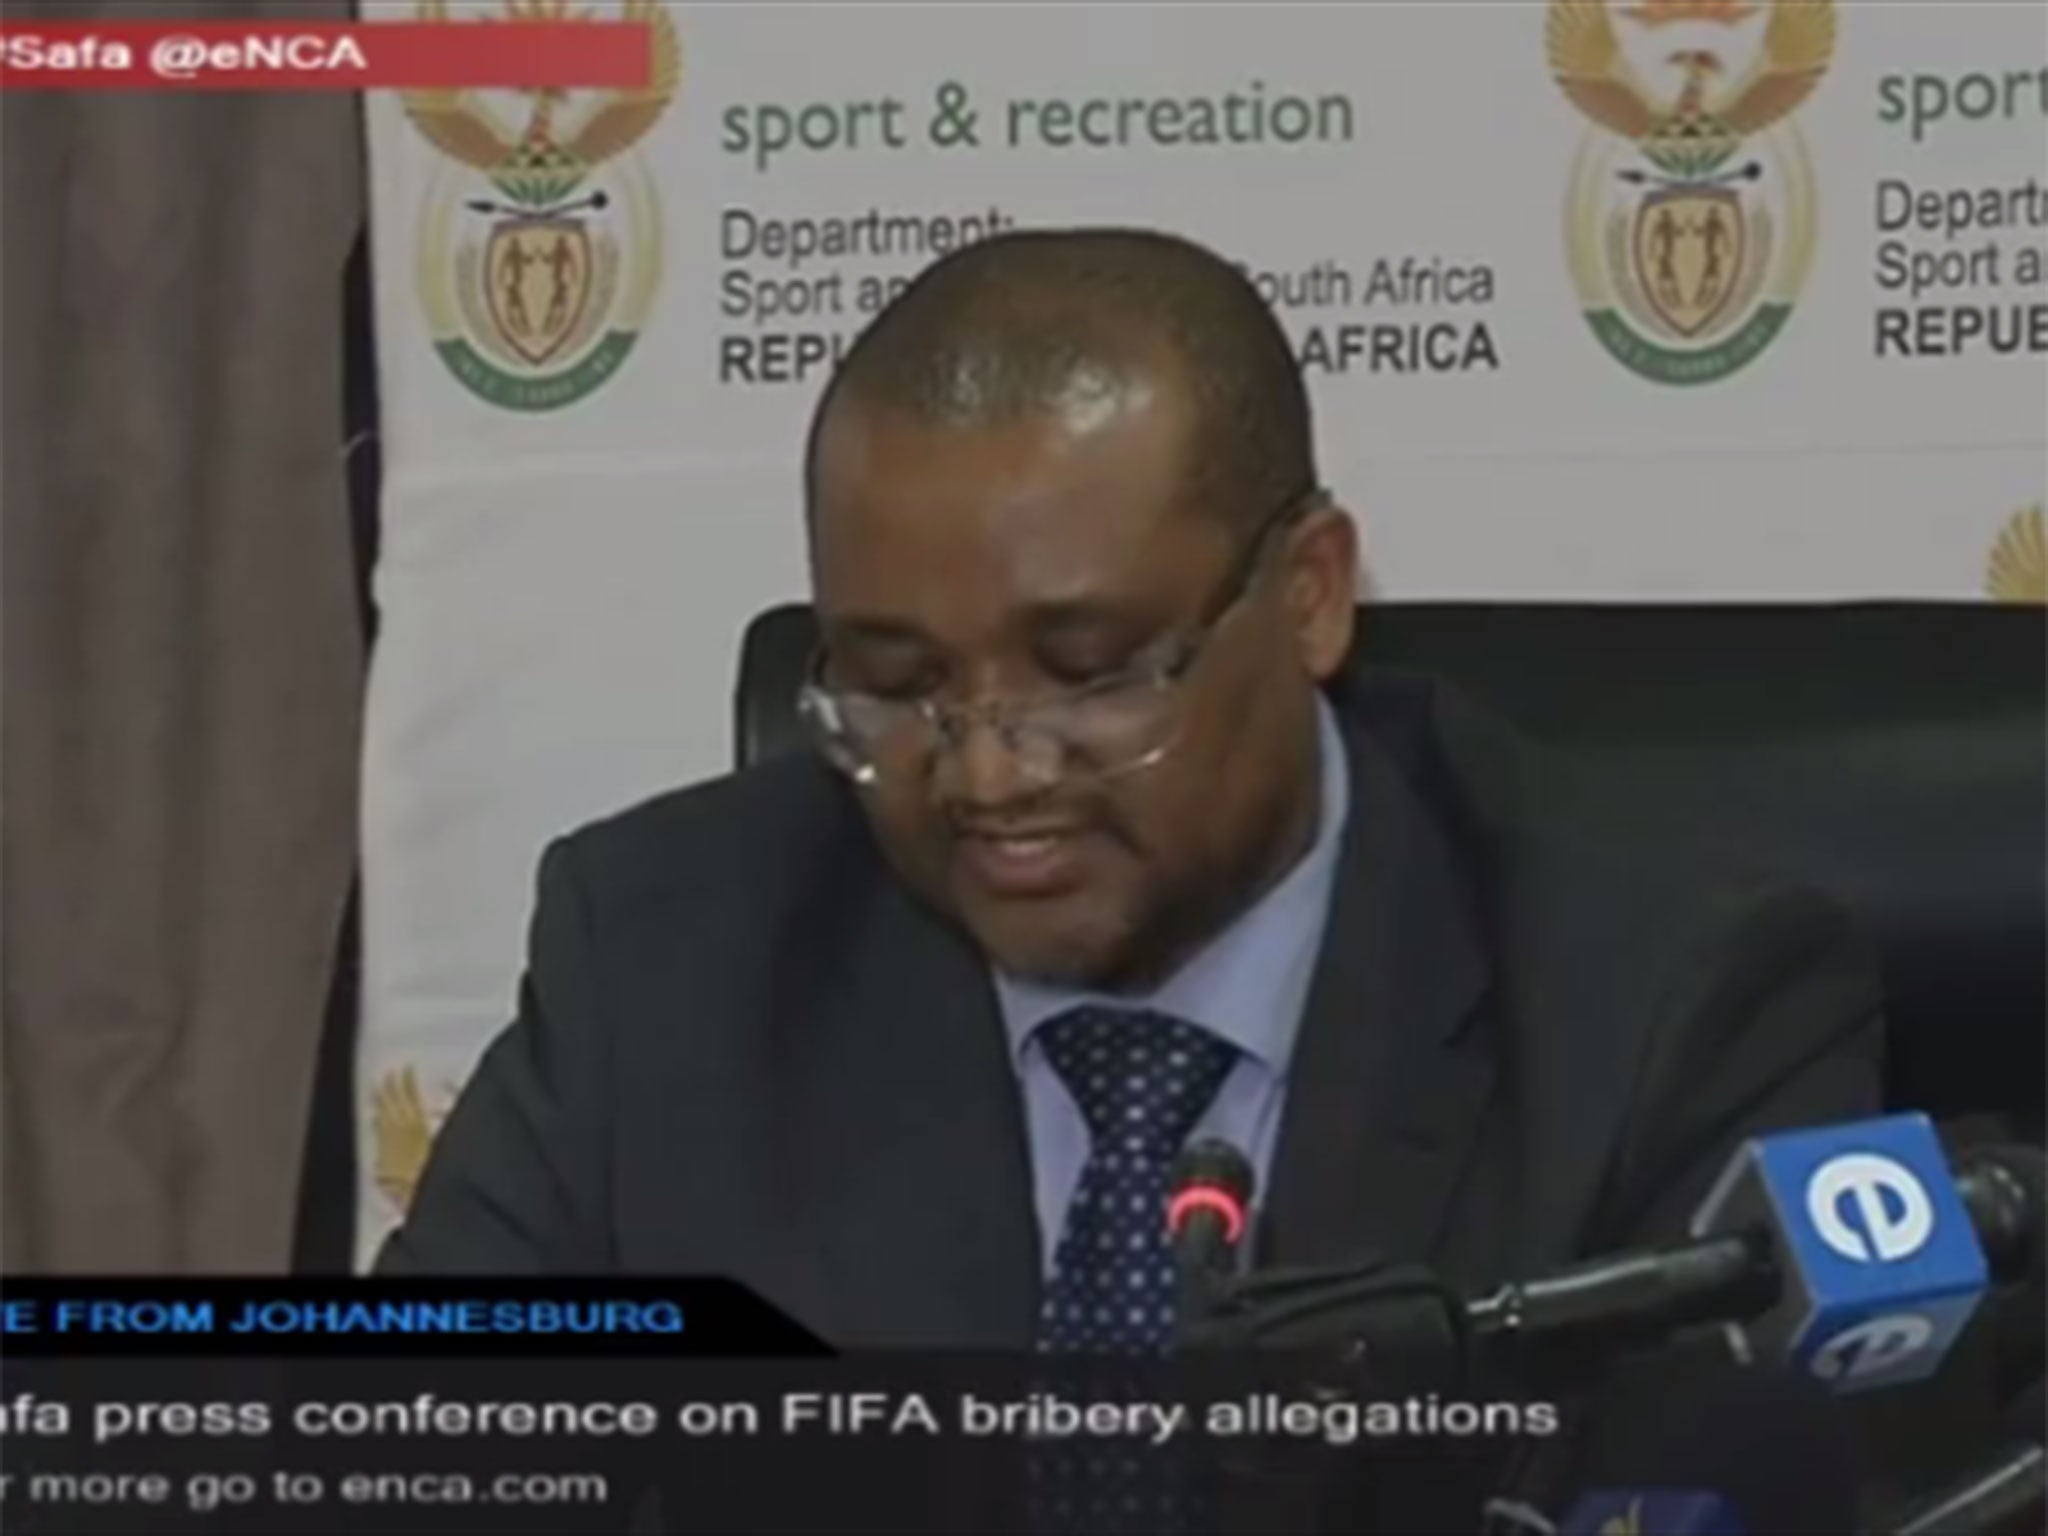 South Africa's sports ministry director general Alec Moemi speaks at a press conference, 3 June 2015